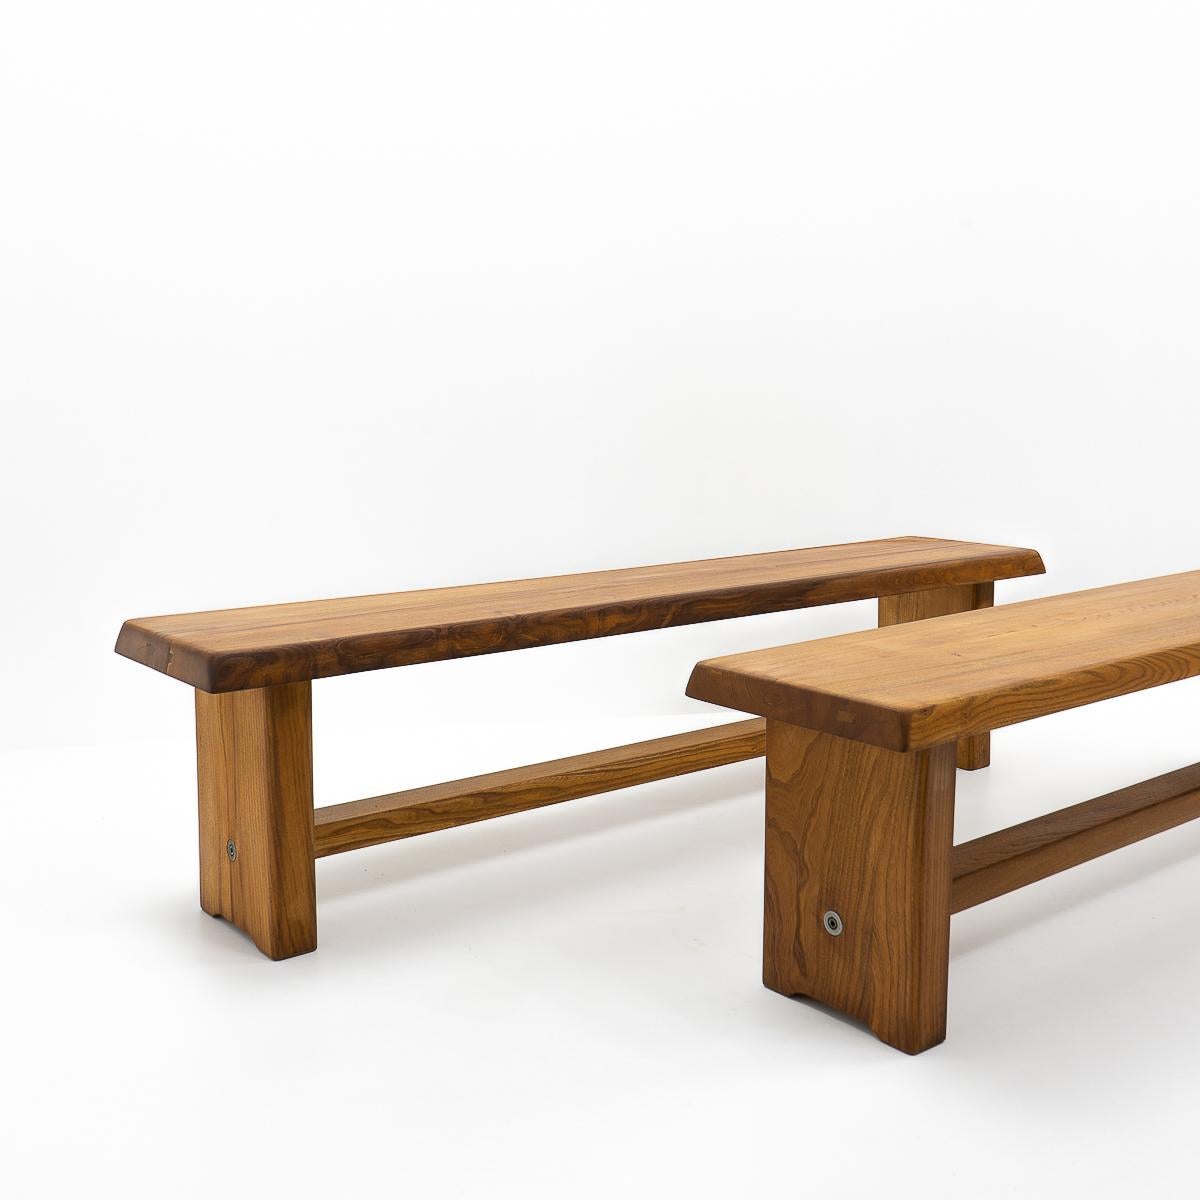 Elm French Design Classic: Pierre Chapo, S14 Benches, 1980s For Sale